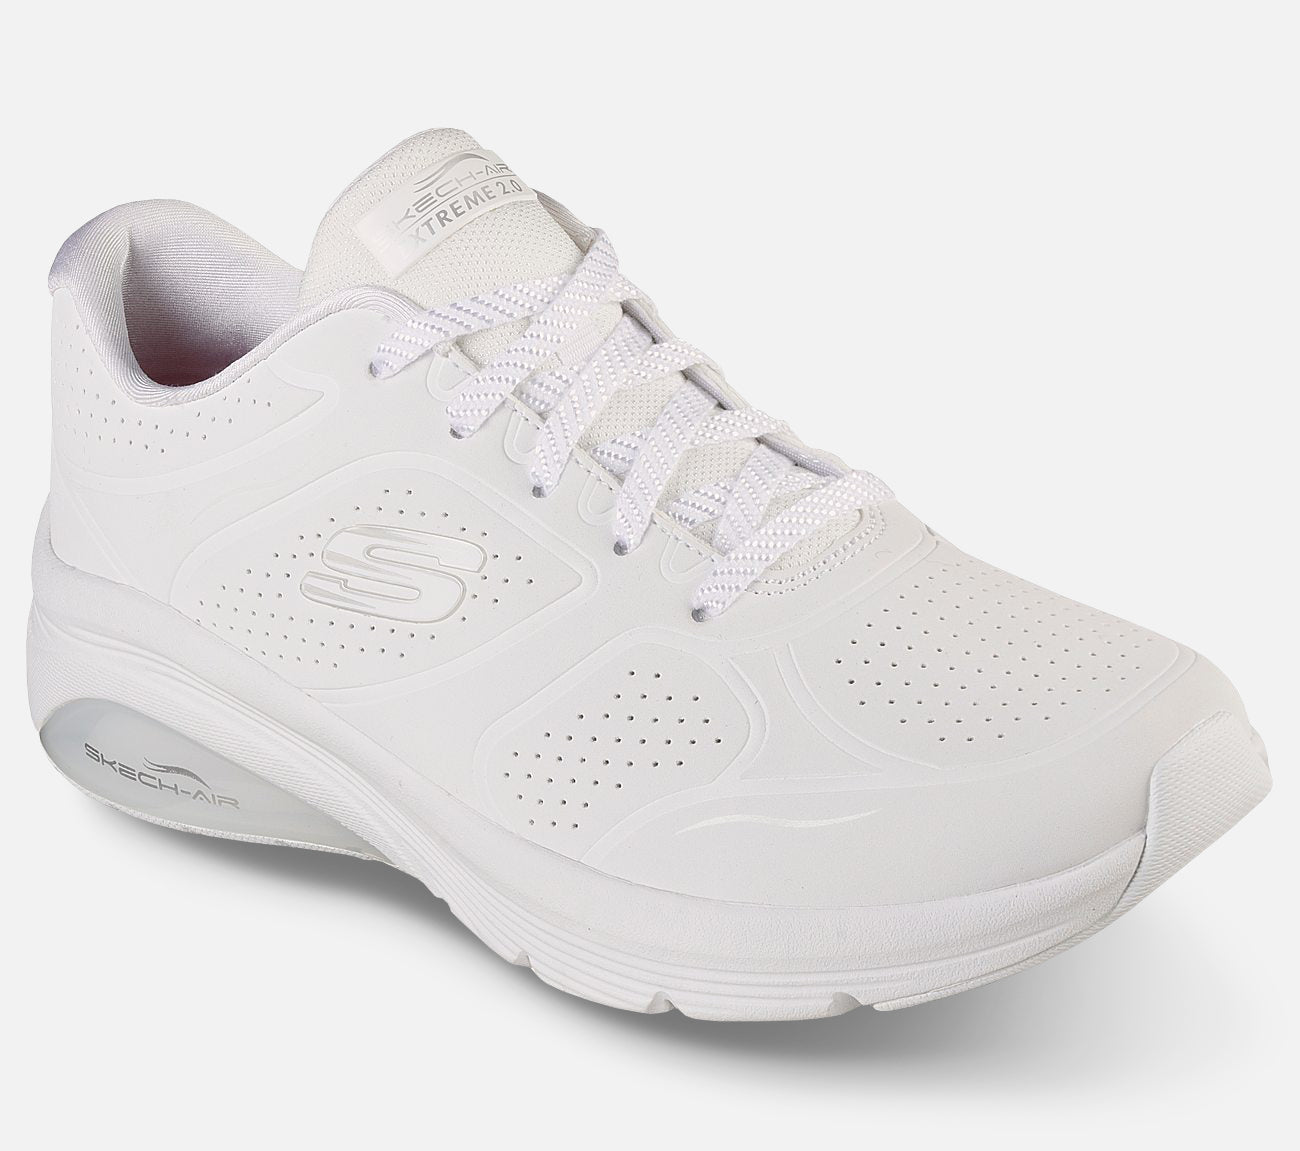 Skech-Air Extreme 2.0 - Classic Finesse Shoe Skechers